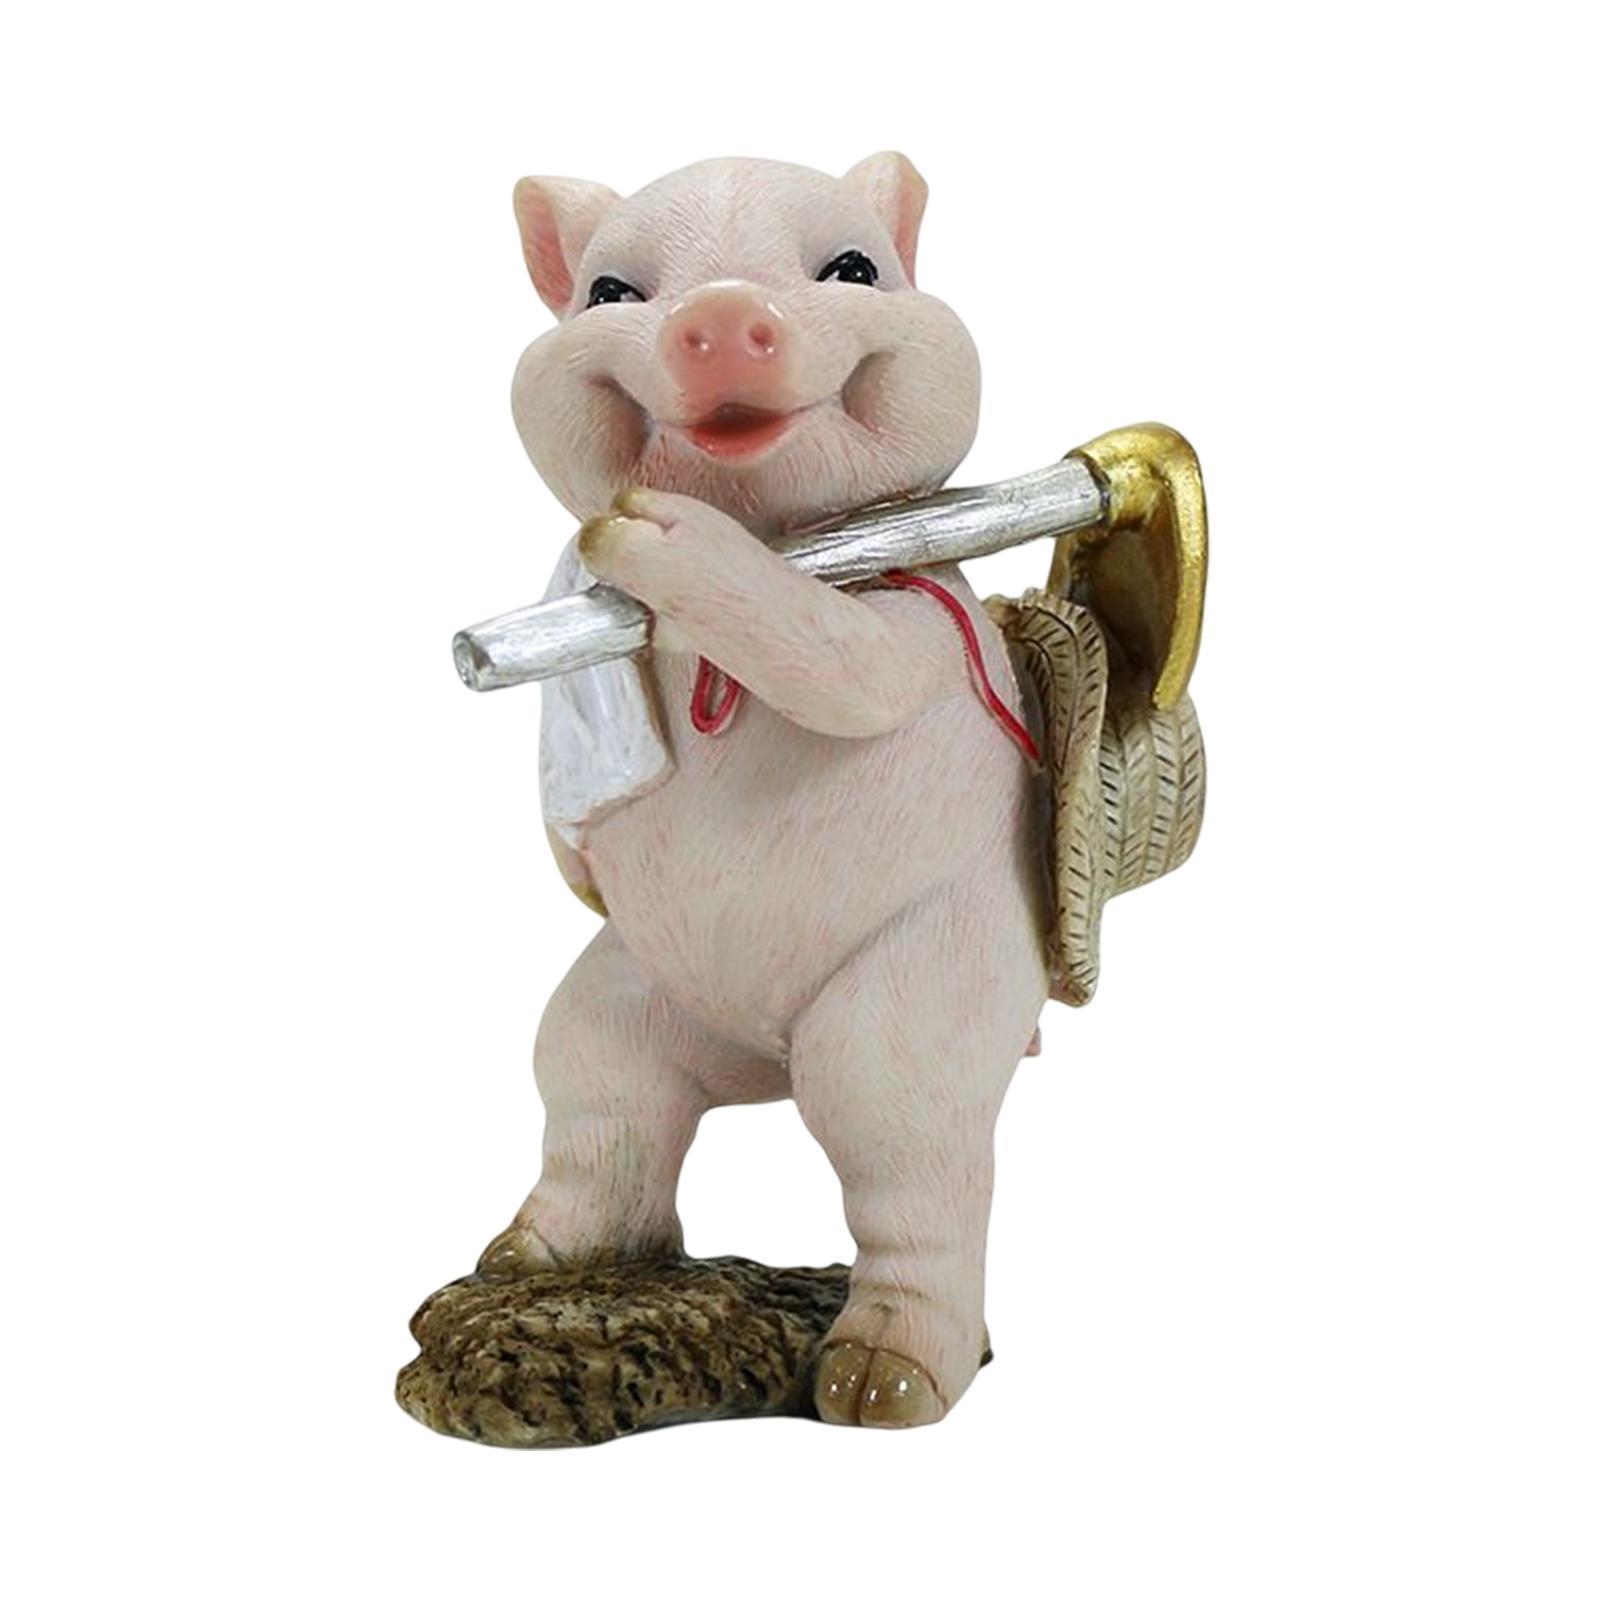 Miniature Pig Figurine Small Pig Sculpture Cute Pig Garden Statue Realistic Pig Decor for Bedroom Kitchen Nursery Room Decoration Gift